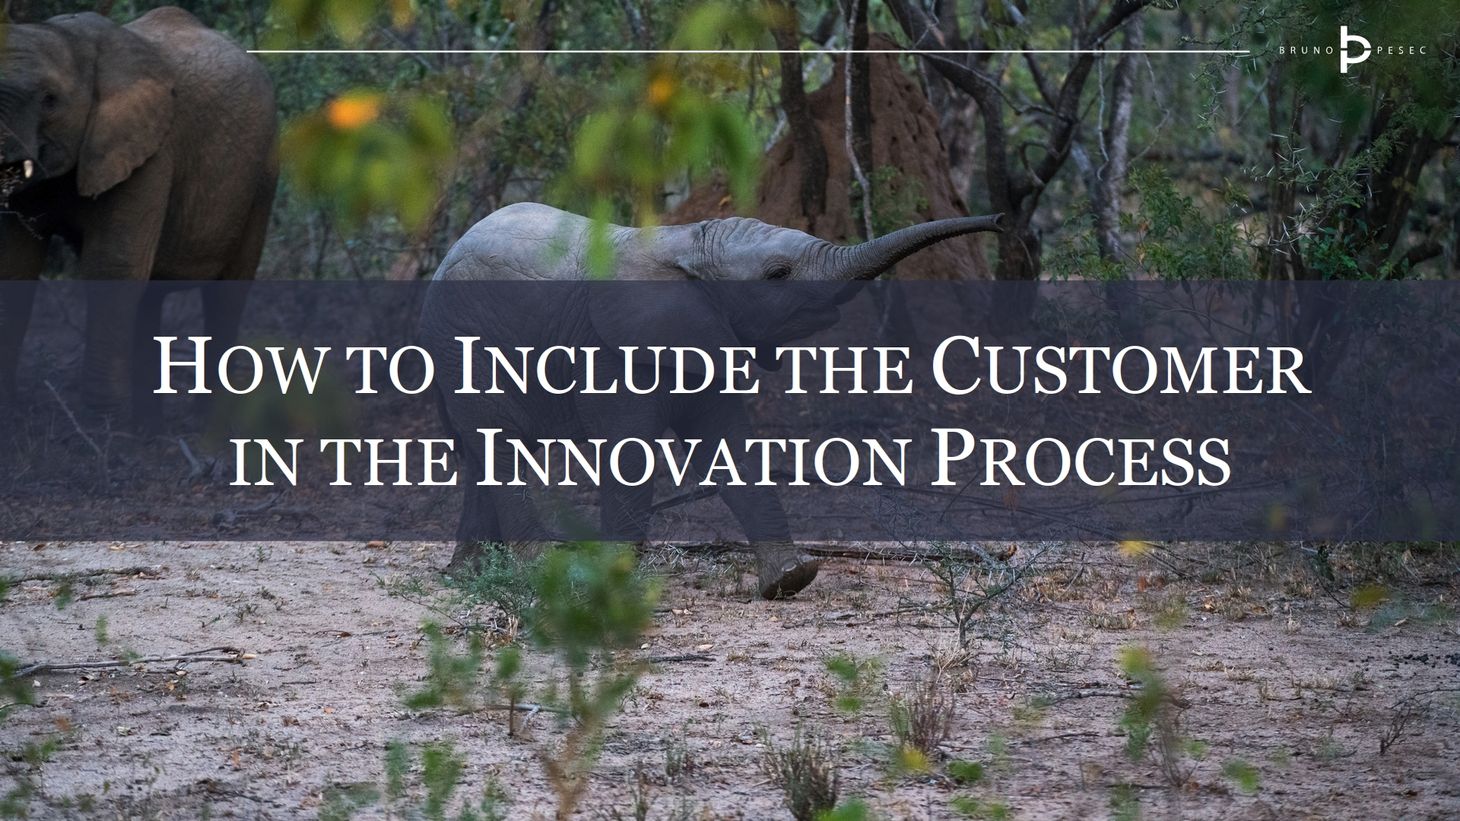 How to include the customer in the innovation process